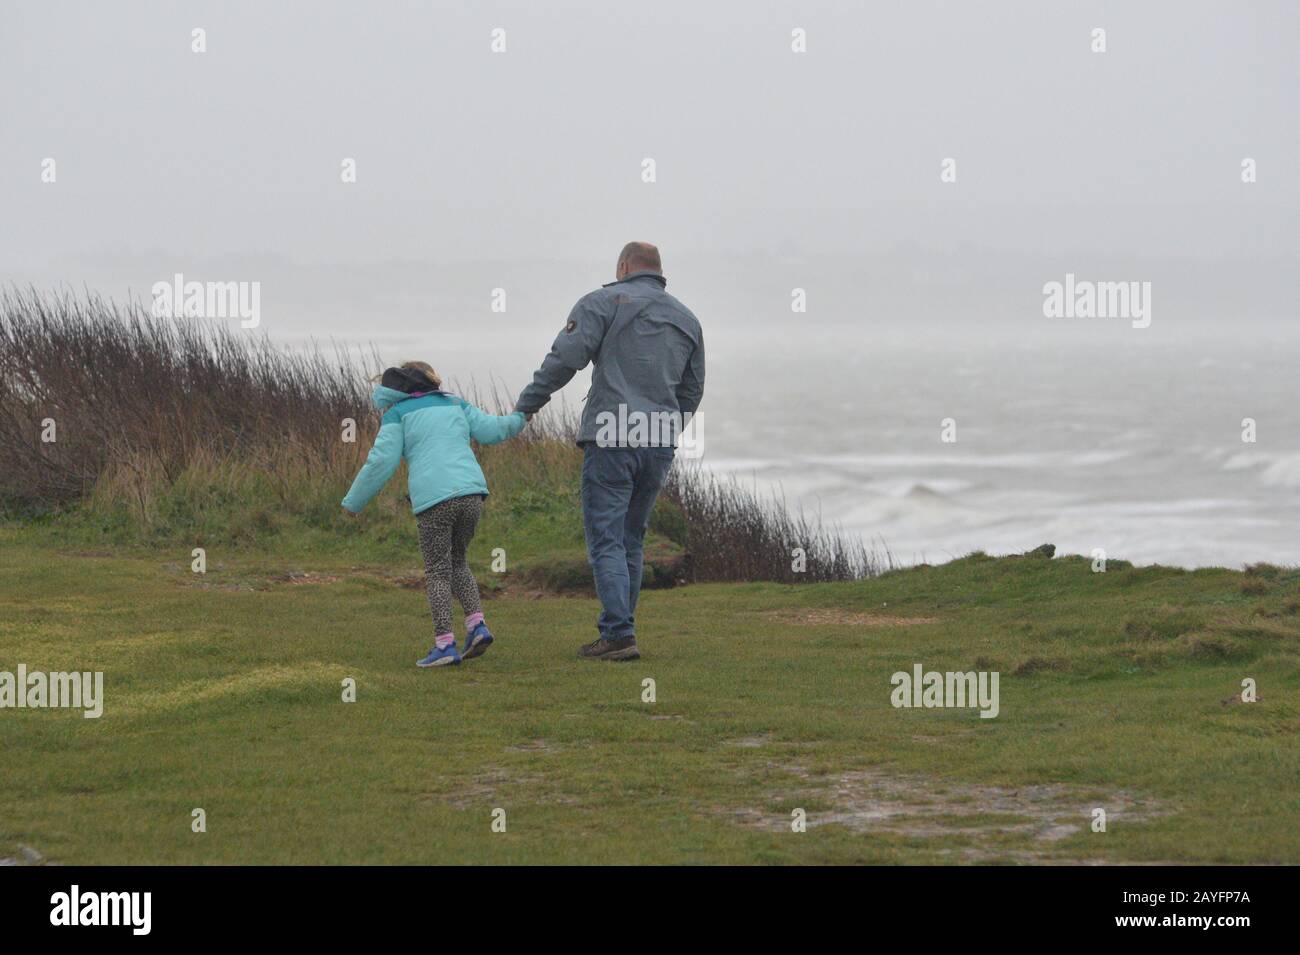 Storm Dennis, classified as a bomb cyclone, brings gale force winds and heavy rain to the south coast. The strong wind whips up the sea into huge waves. People leaning into the wind on the clifftop, Milford-on-Sea, Hampshire, England, UK, 15th February 2020, Weather: Stock Photo